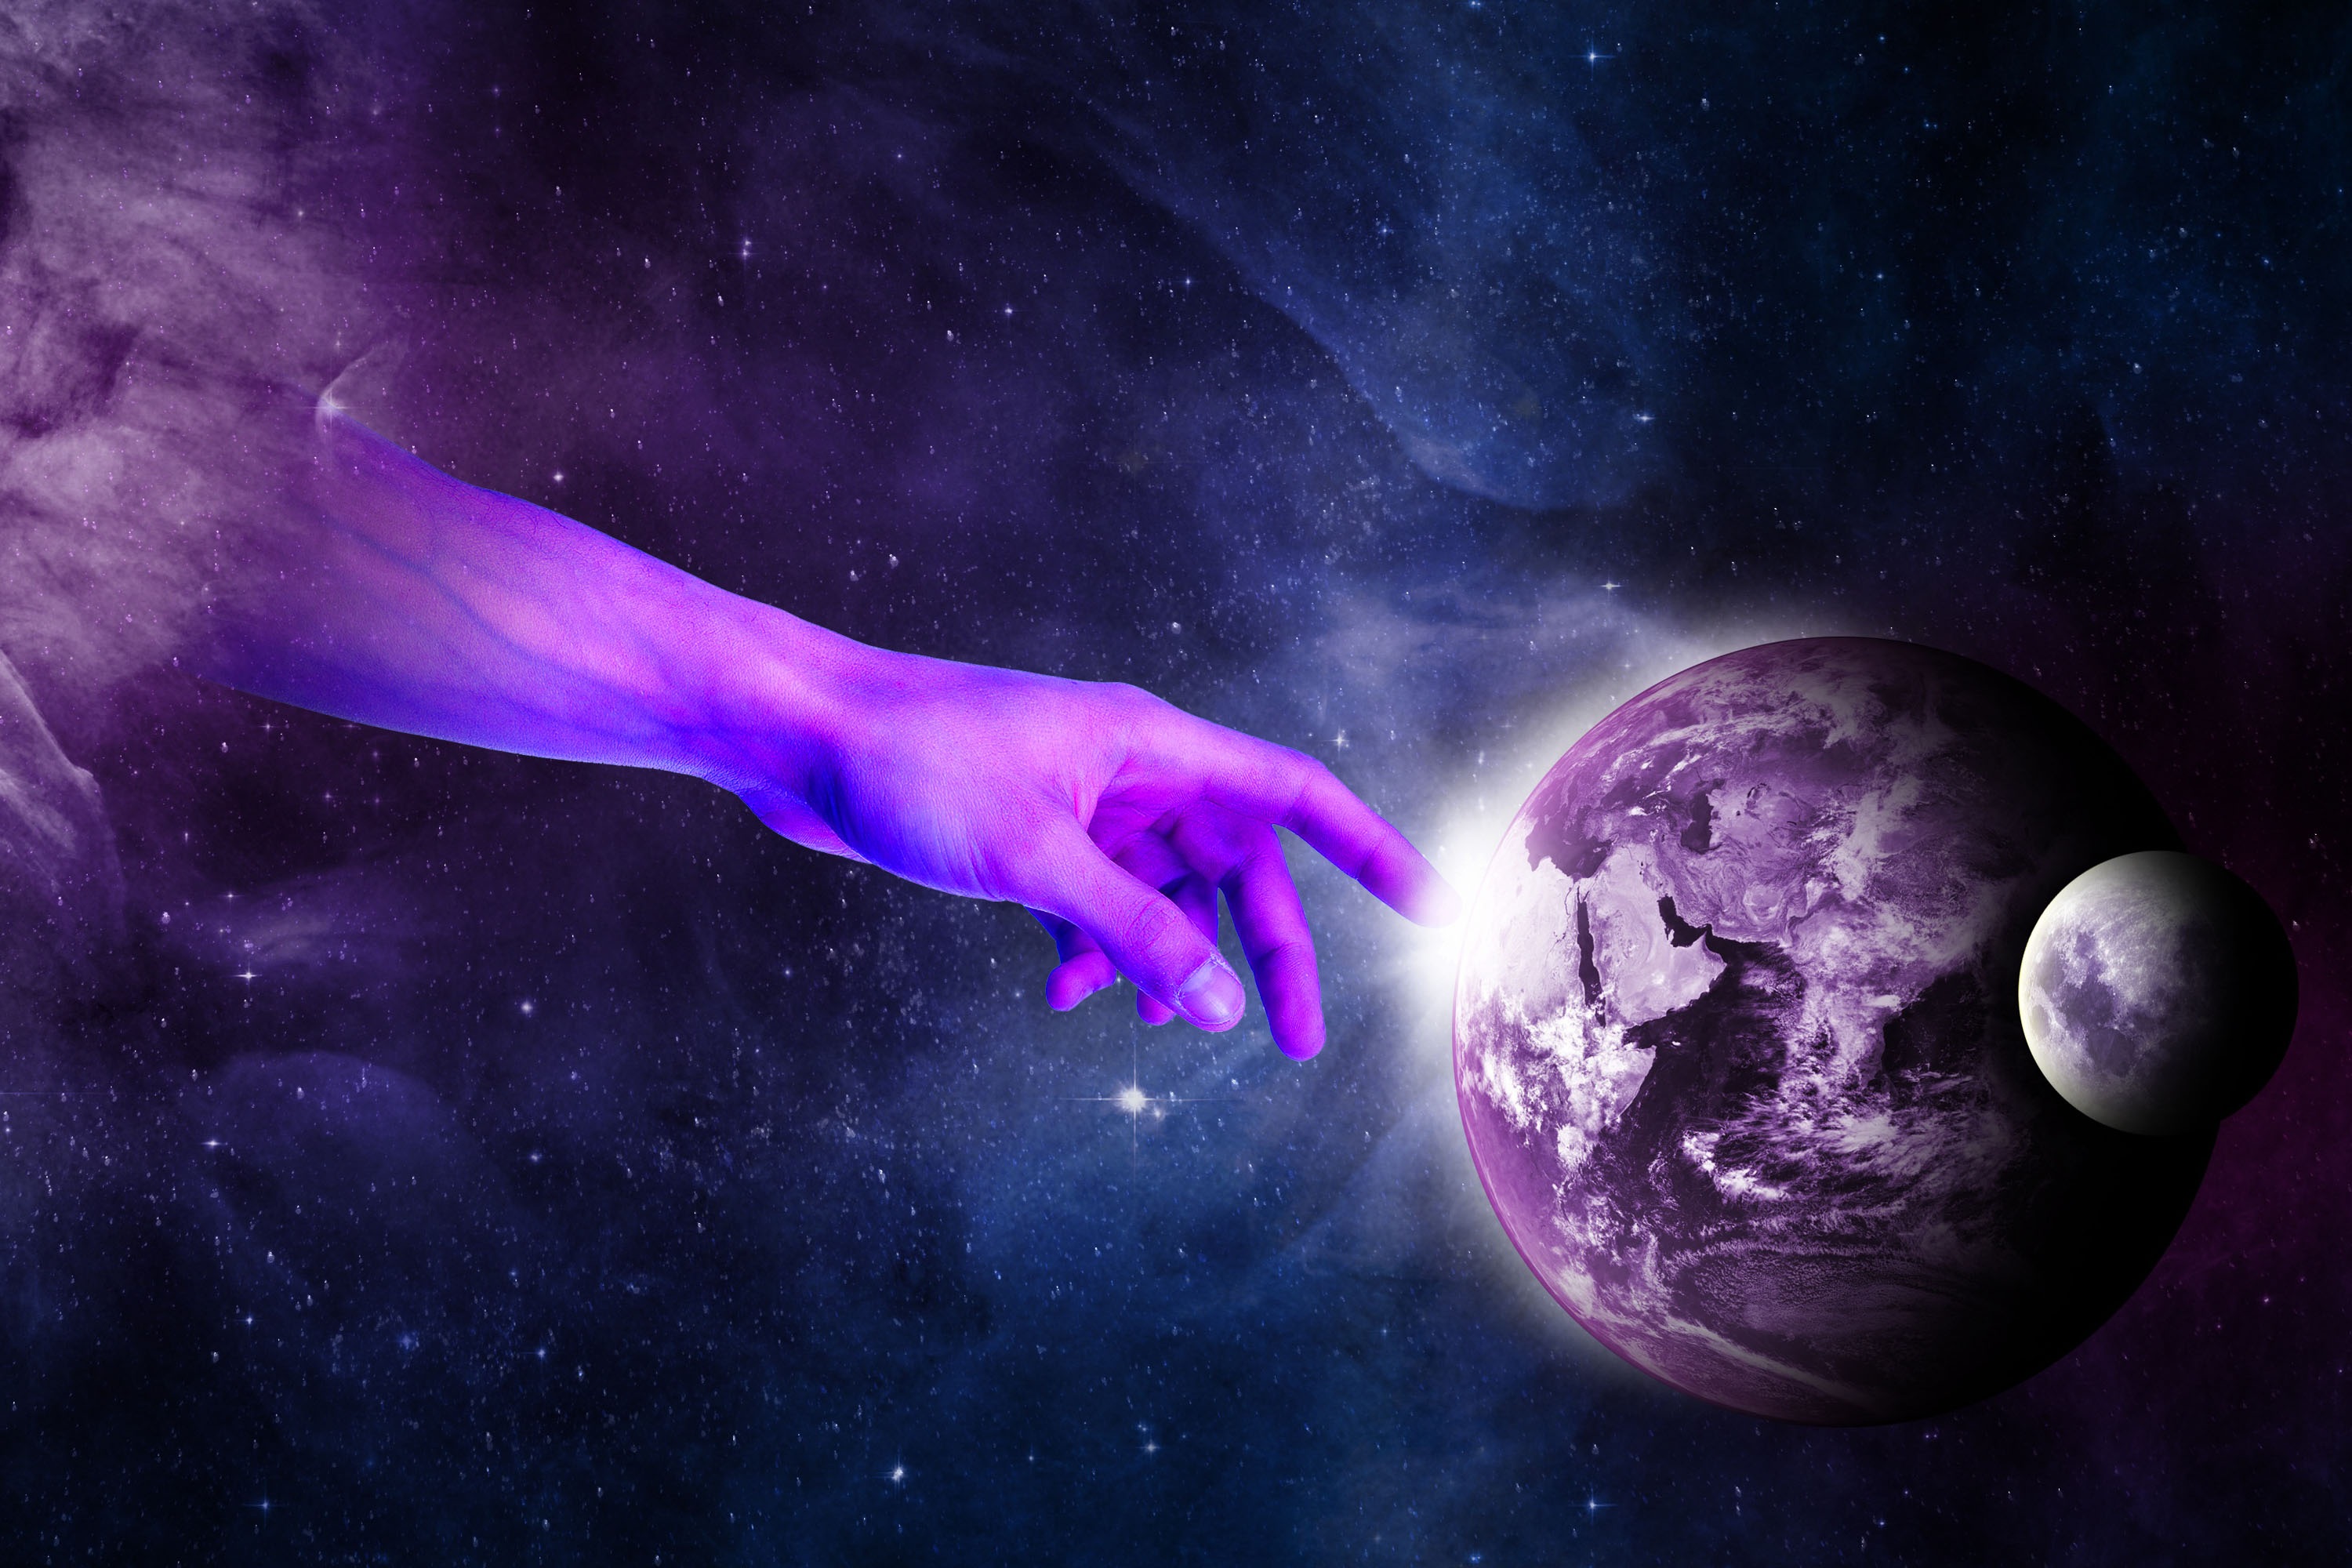 image God's finger touching the Earth white sparks also moon over some of the Earth, purple blue white and black